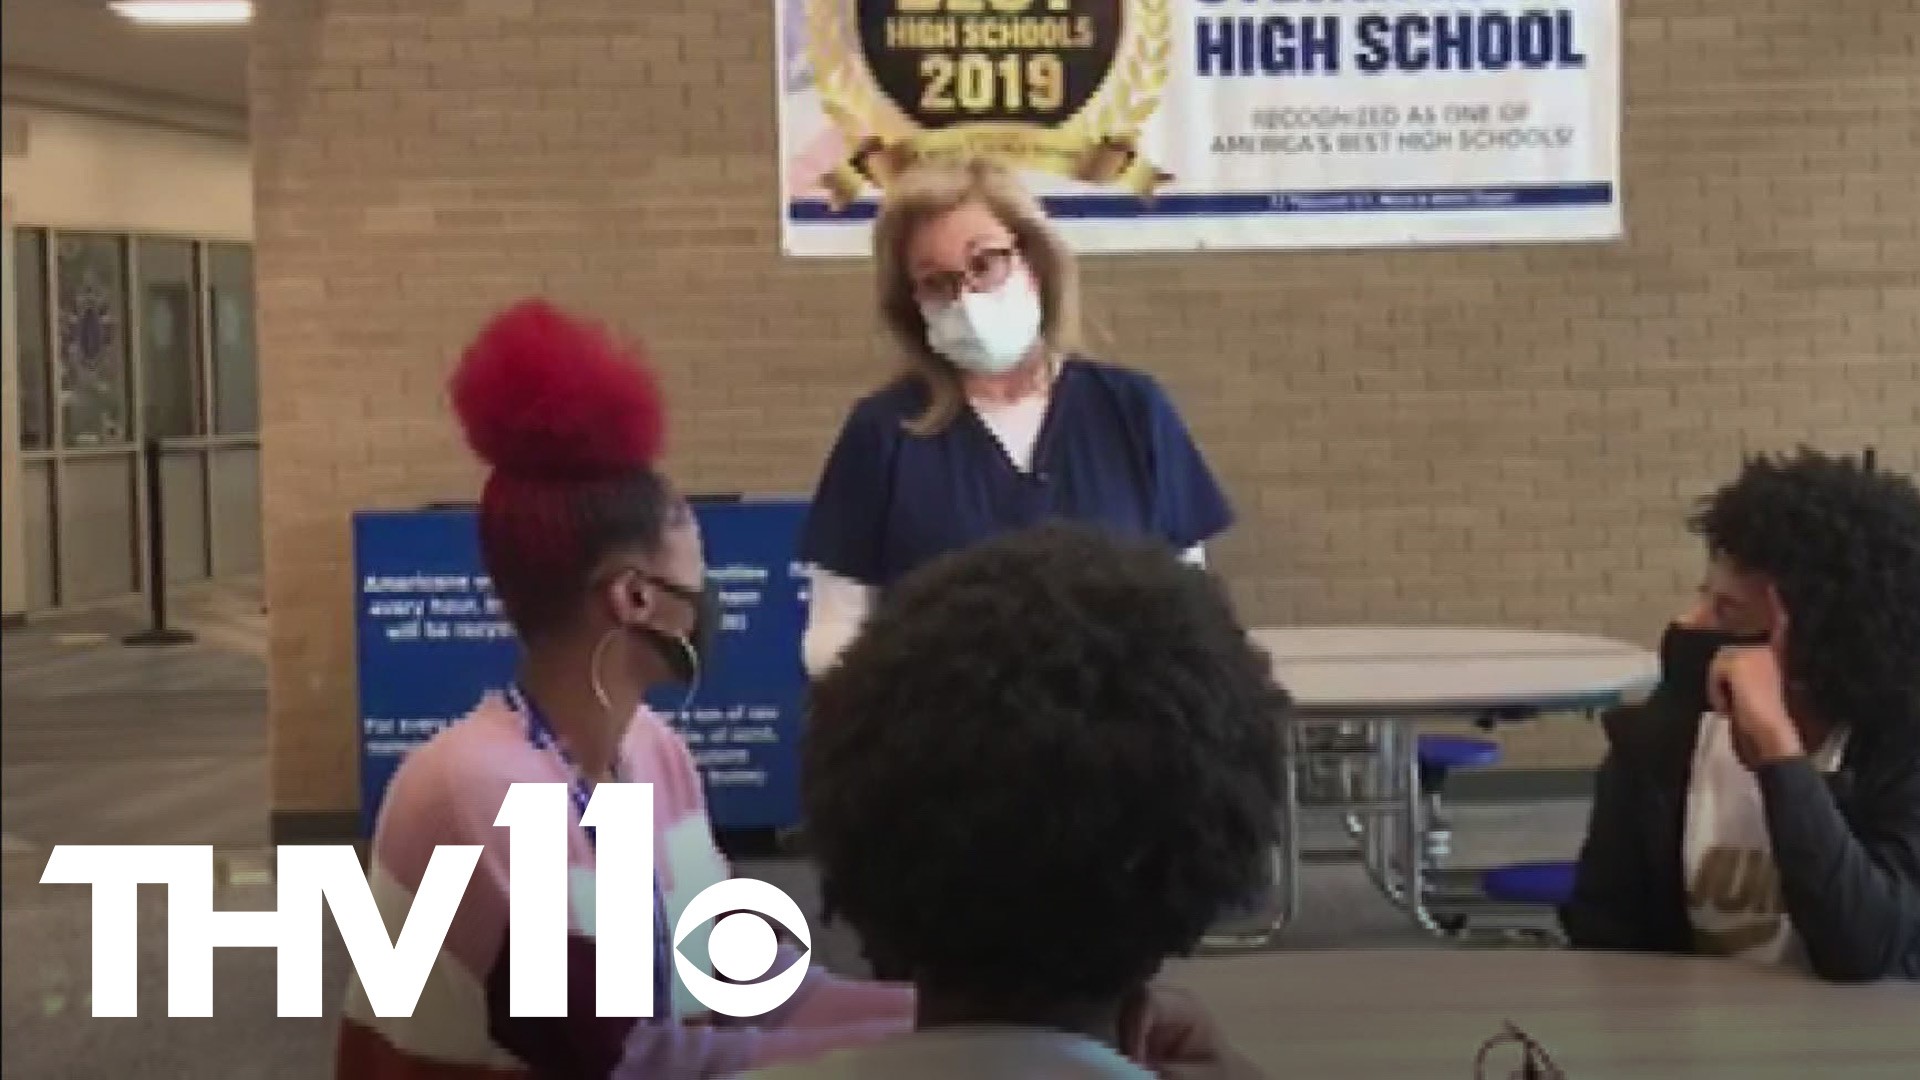 A Sylvan Hills High School teacher is the first in the school to get the COVID-19 vaccine and now she's educating her students about vaccines and how they work.